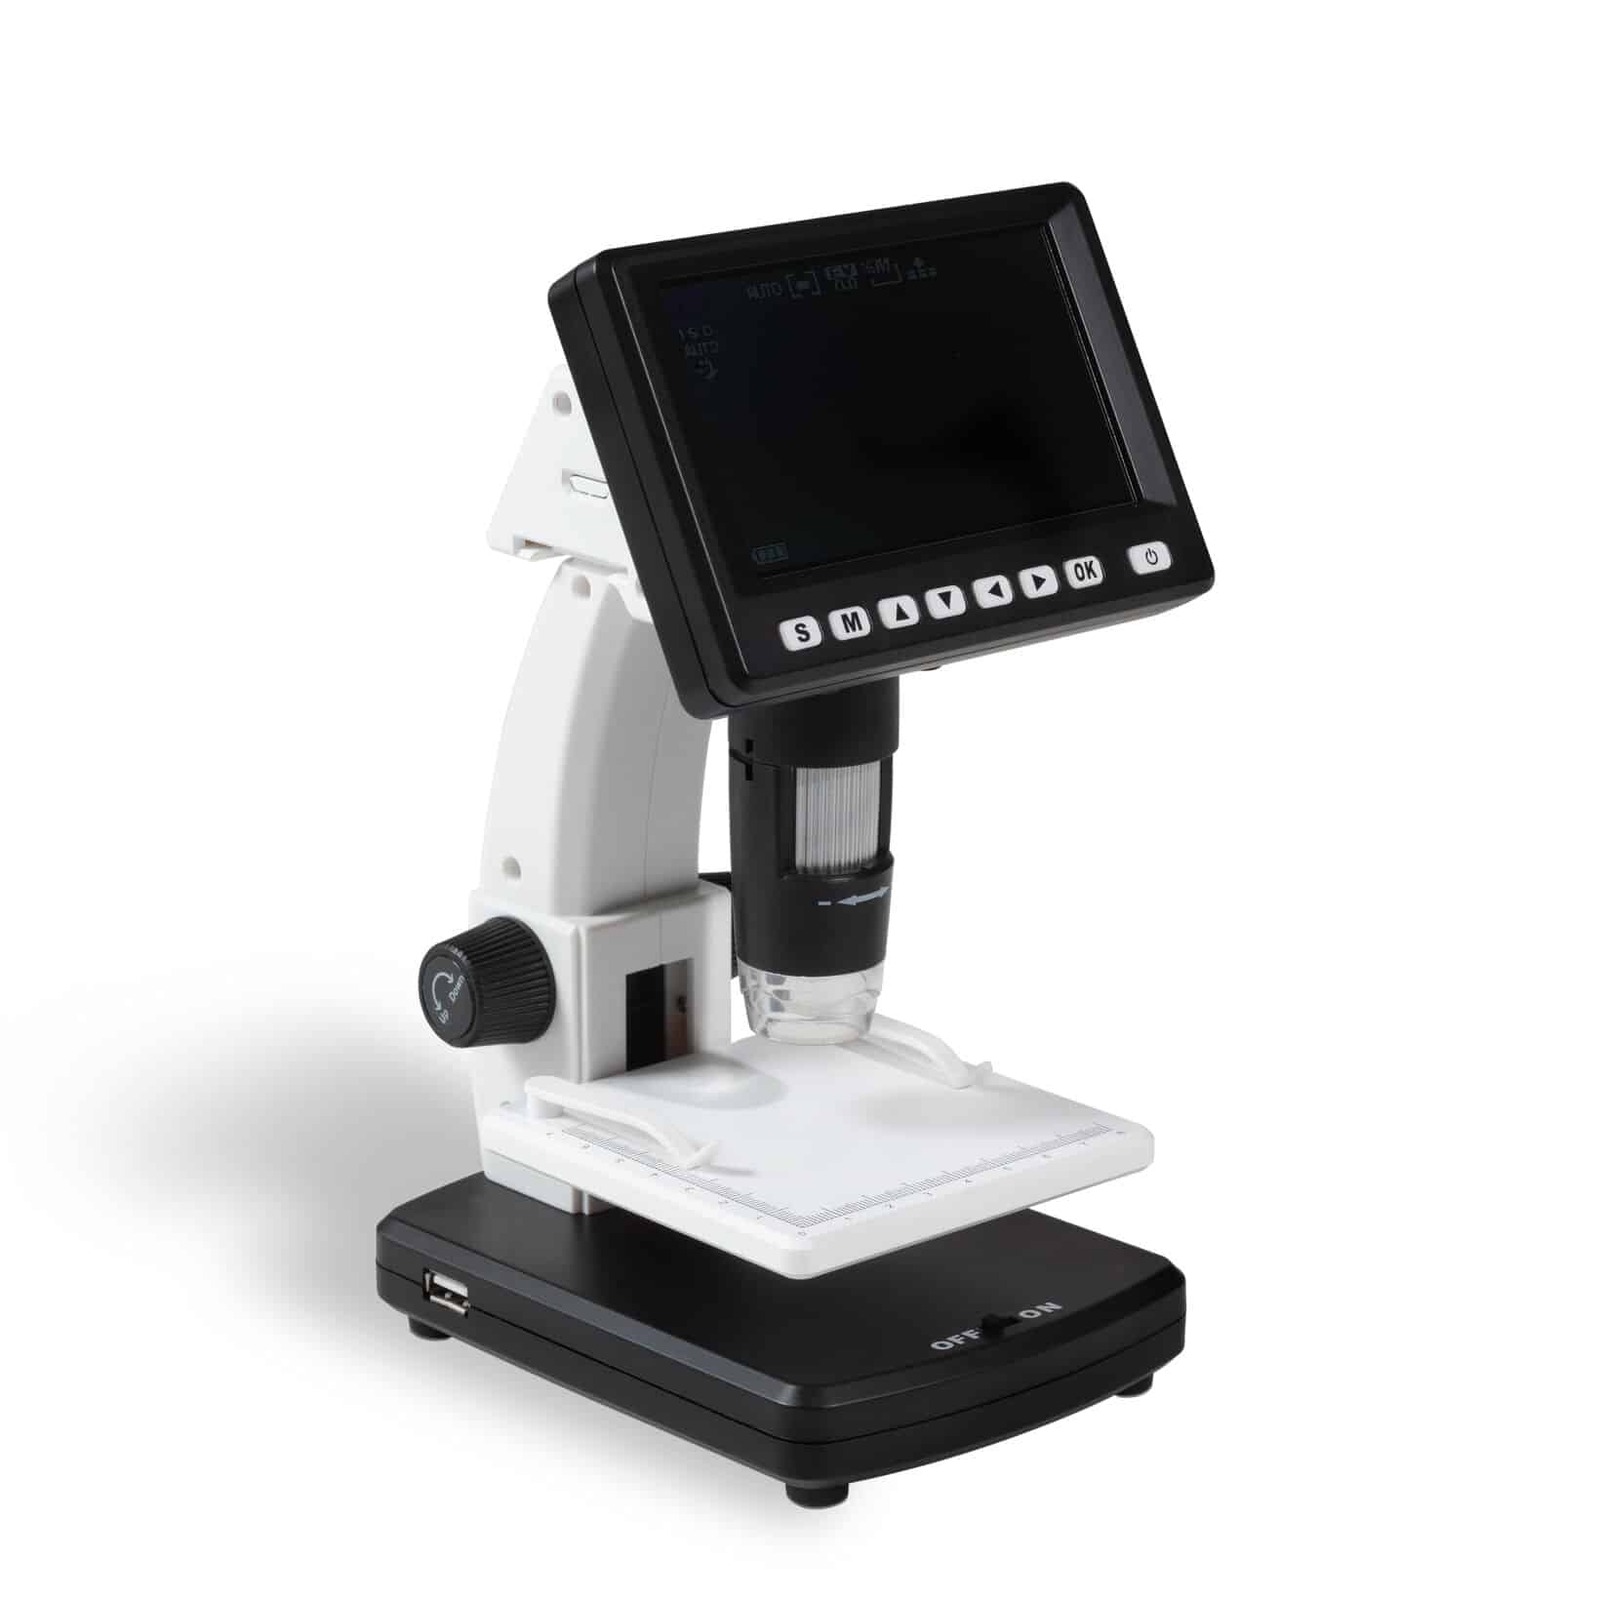 LCD digital microscope with 20–200x magnification